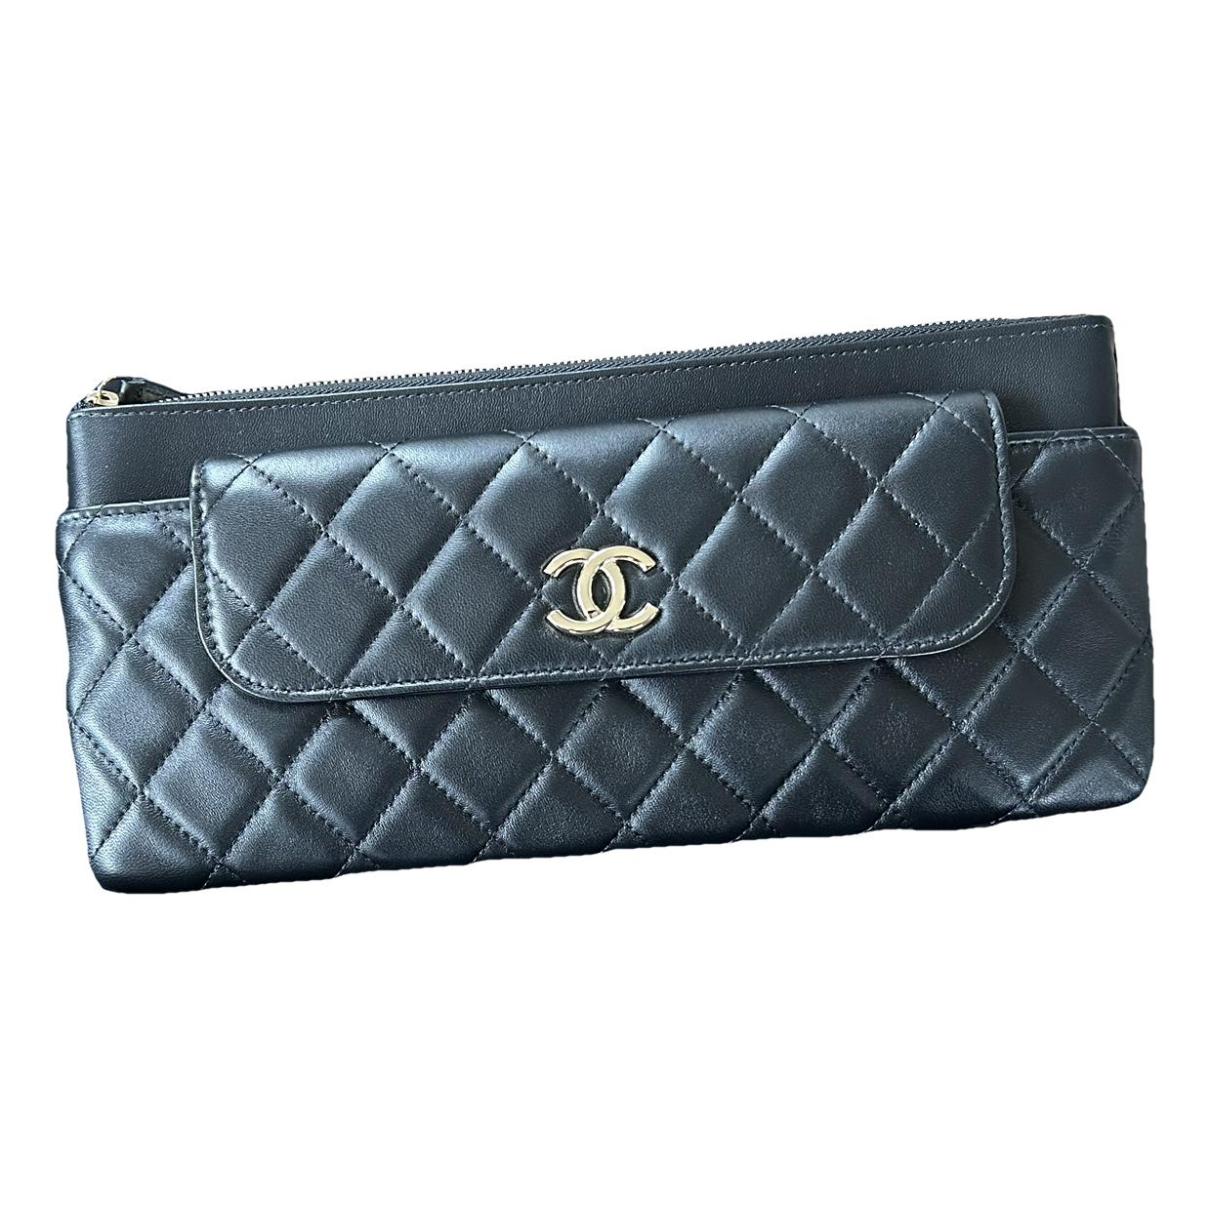 Timeless/classique leather clutch bag Chanel Black in Leather - 38732567